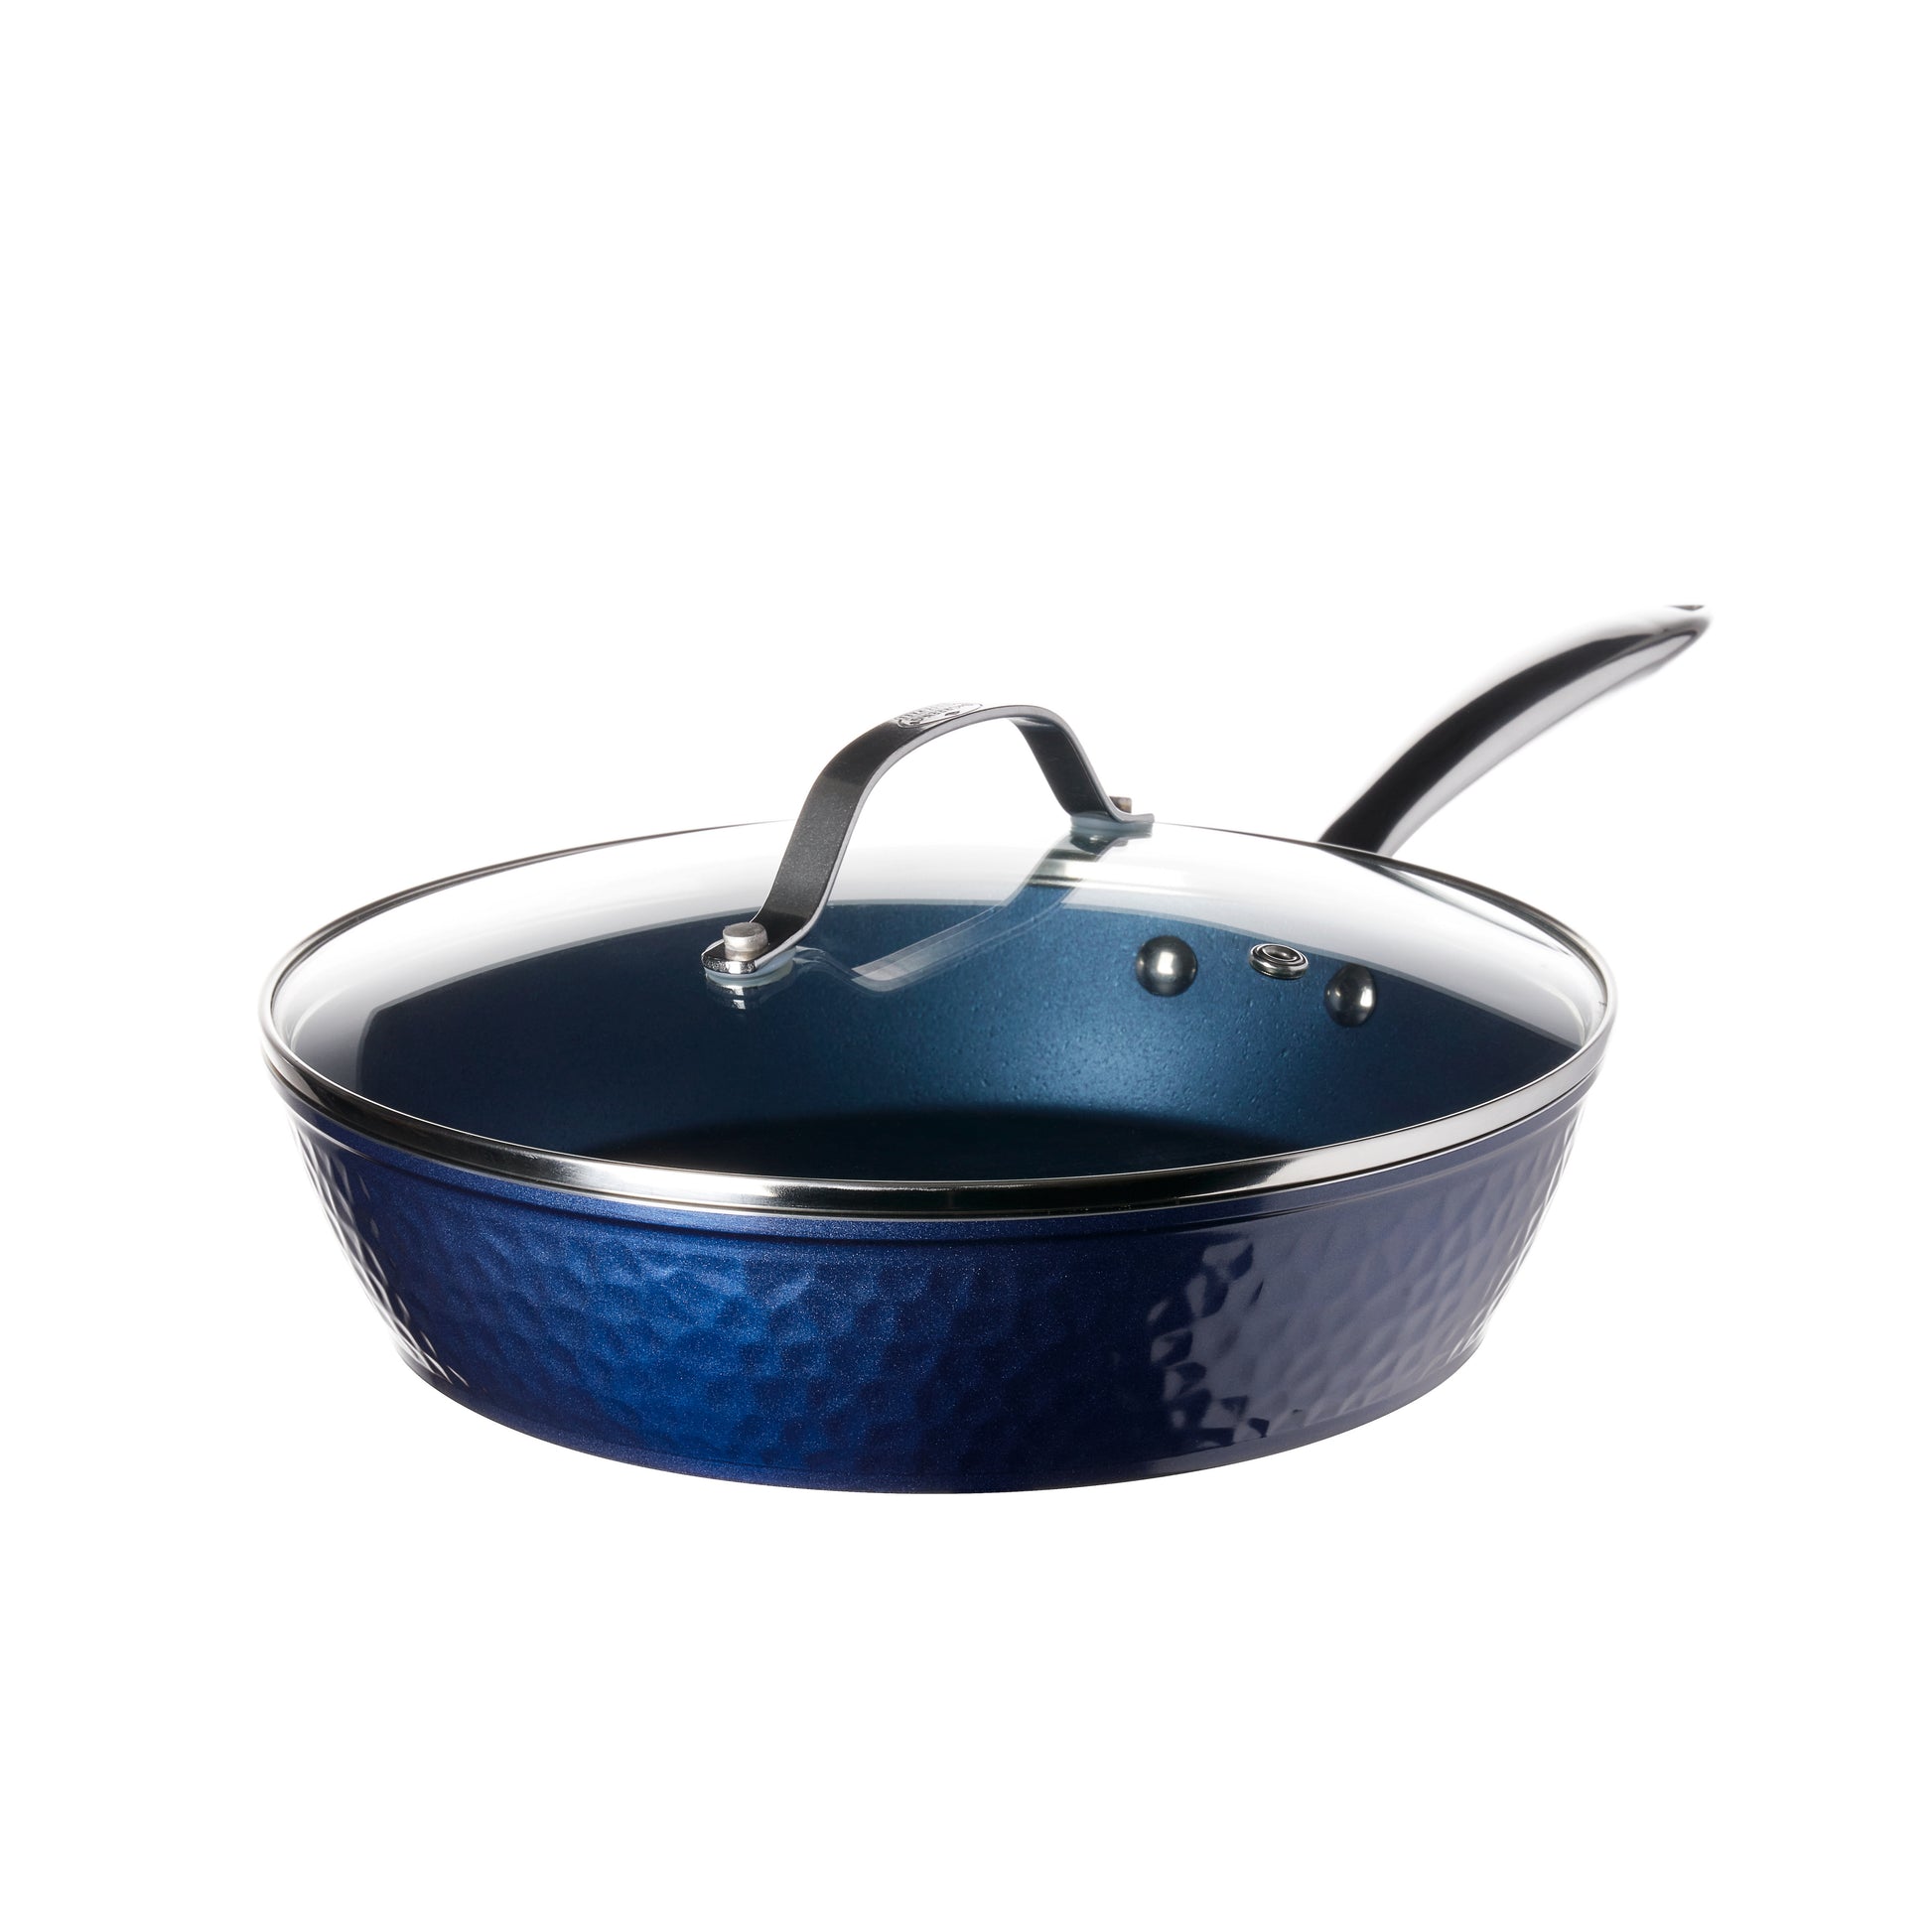 Hammered Sapphire Blue 10 Pan with Glass Lid – OrGreenic Cookware